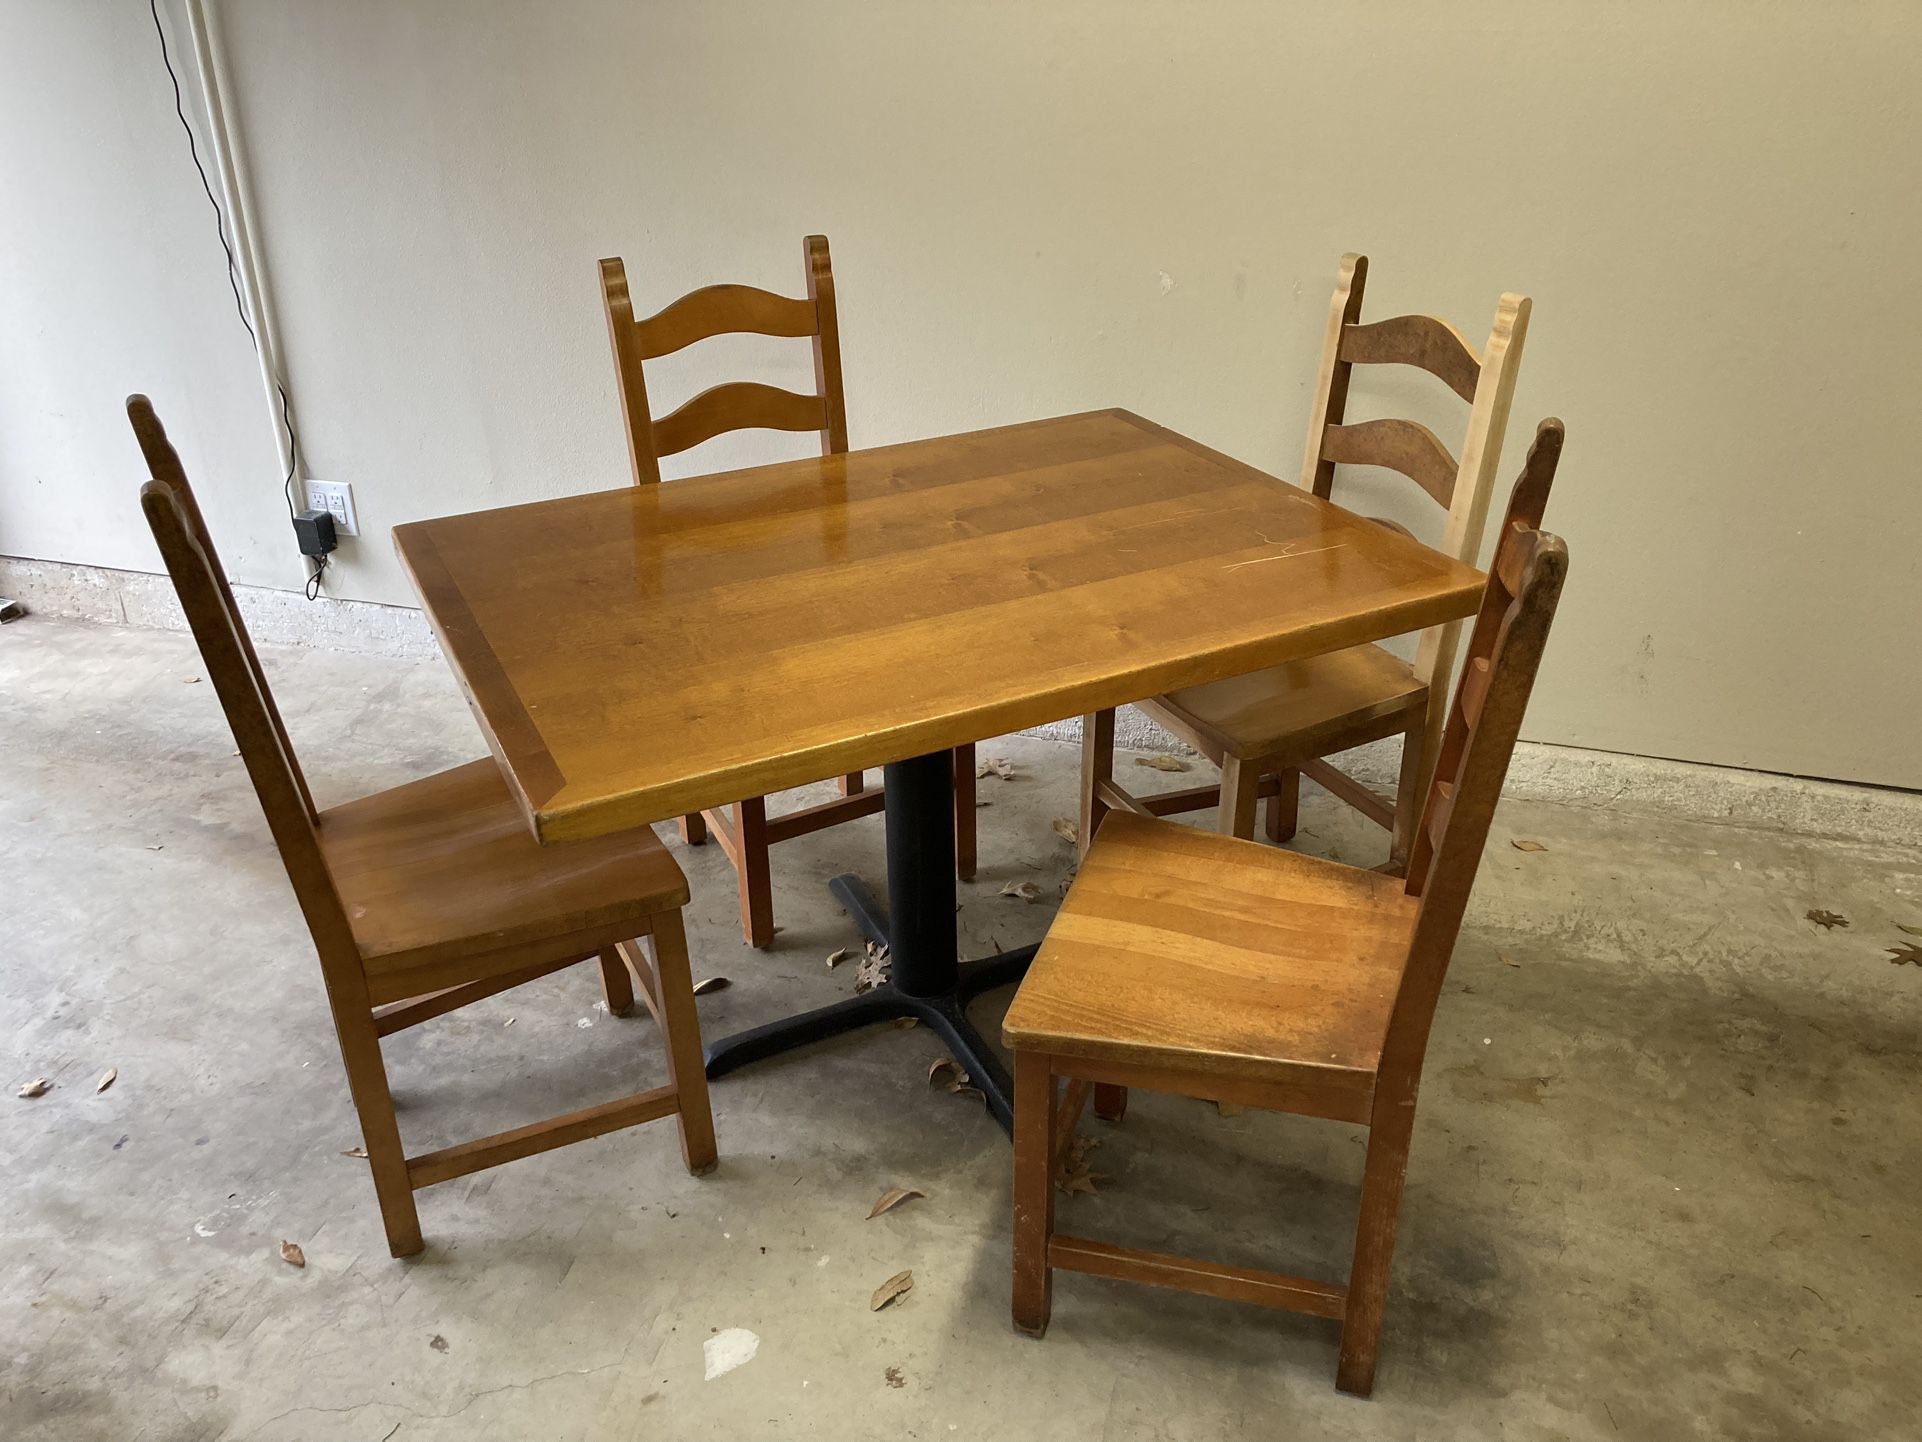 Restaurant Grade Dining Table and Chairs